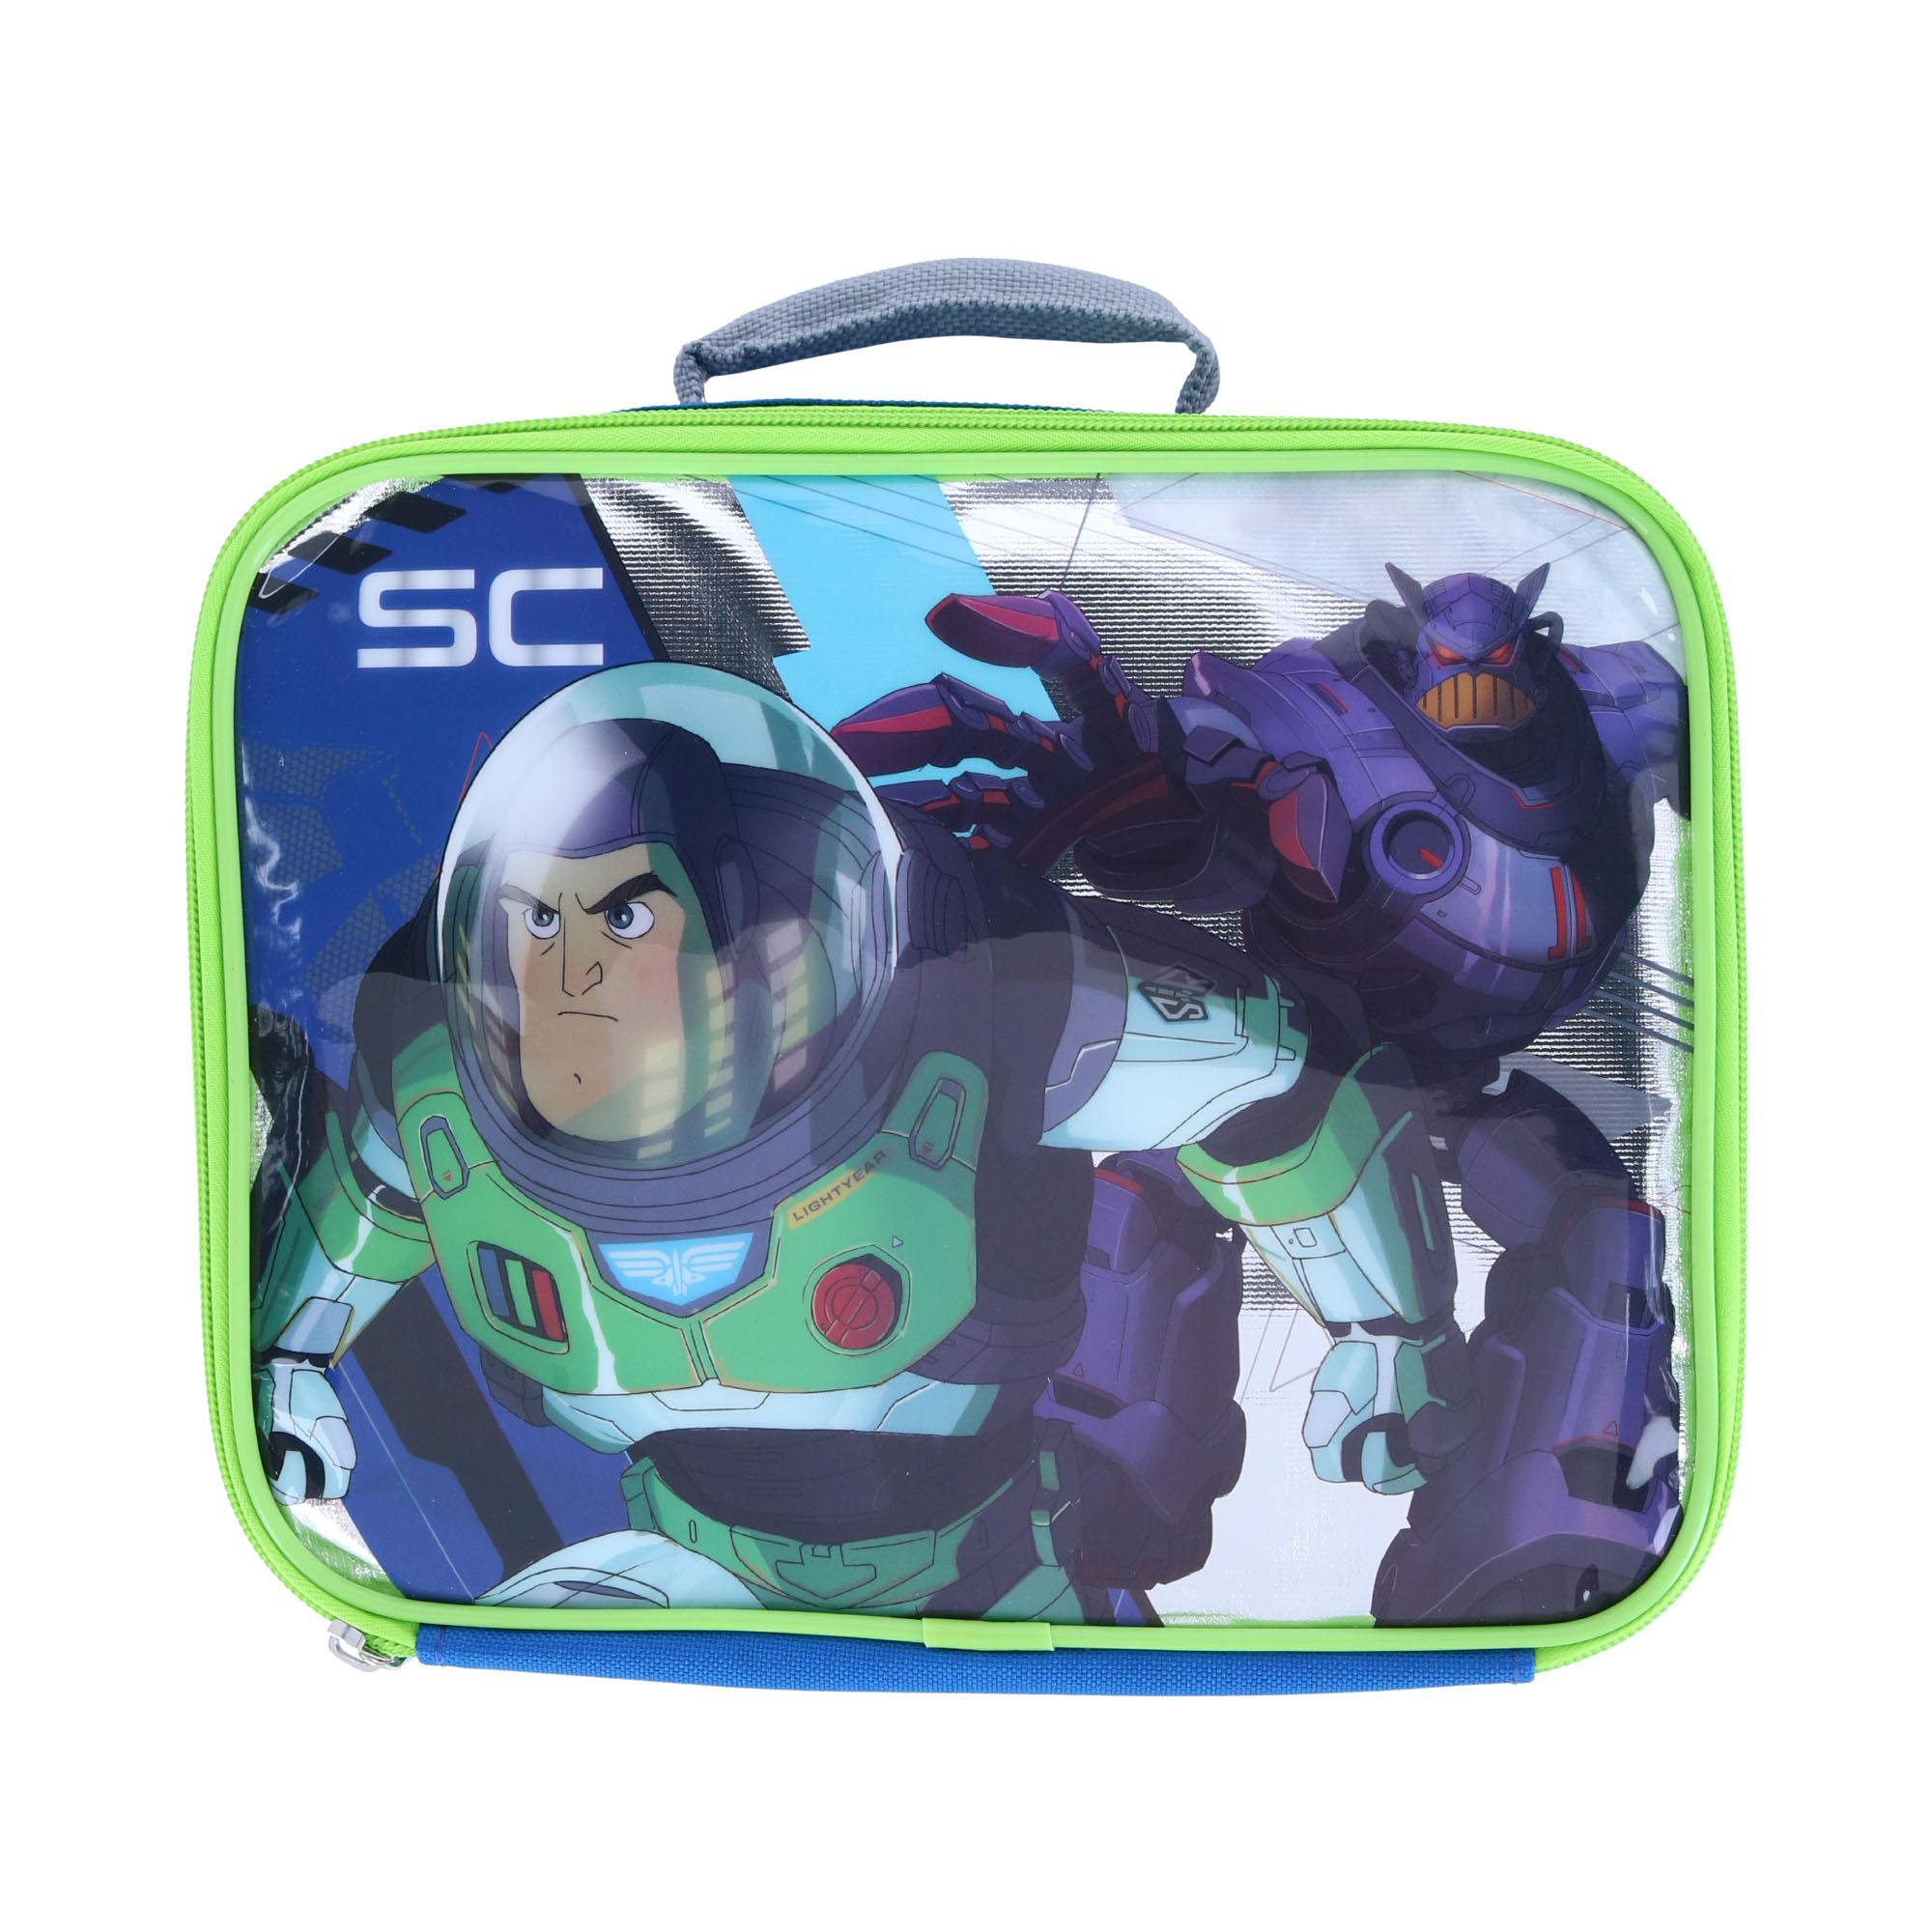 Disney Boy's Buzz Lightyear Lunch Bag with Carry Handle